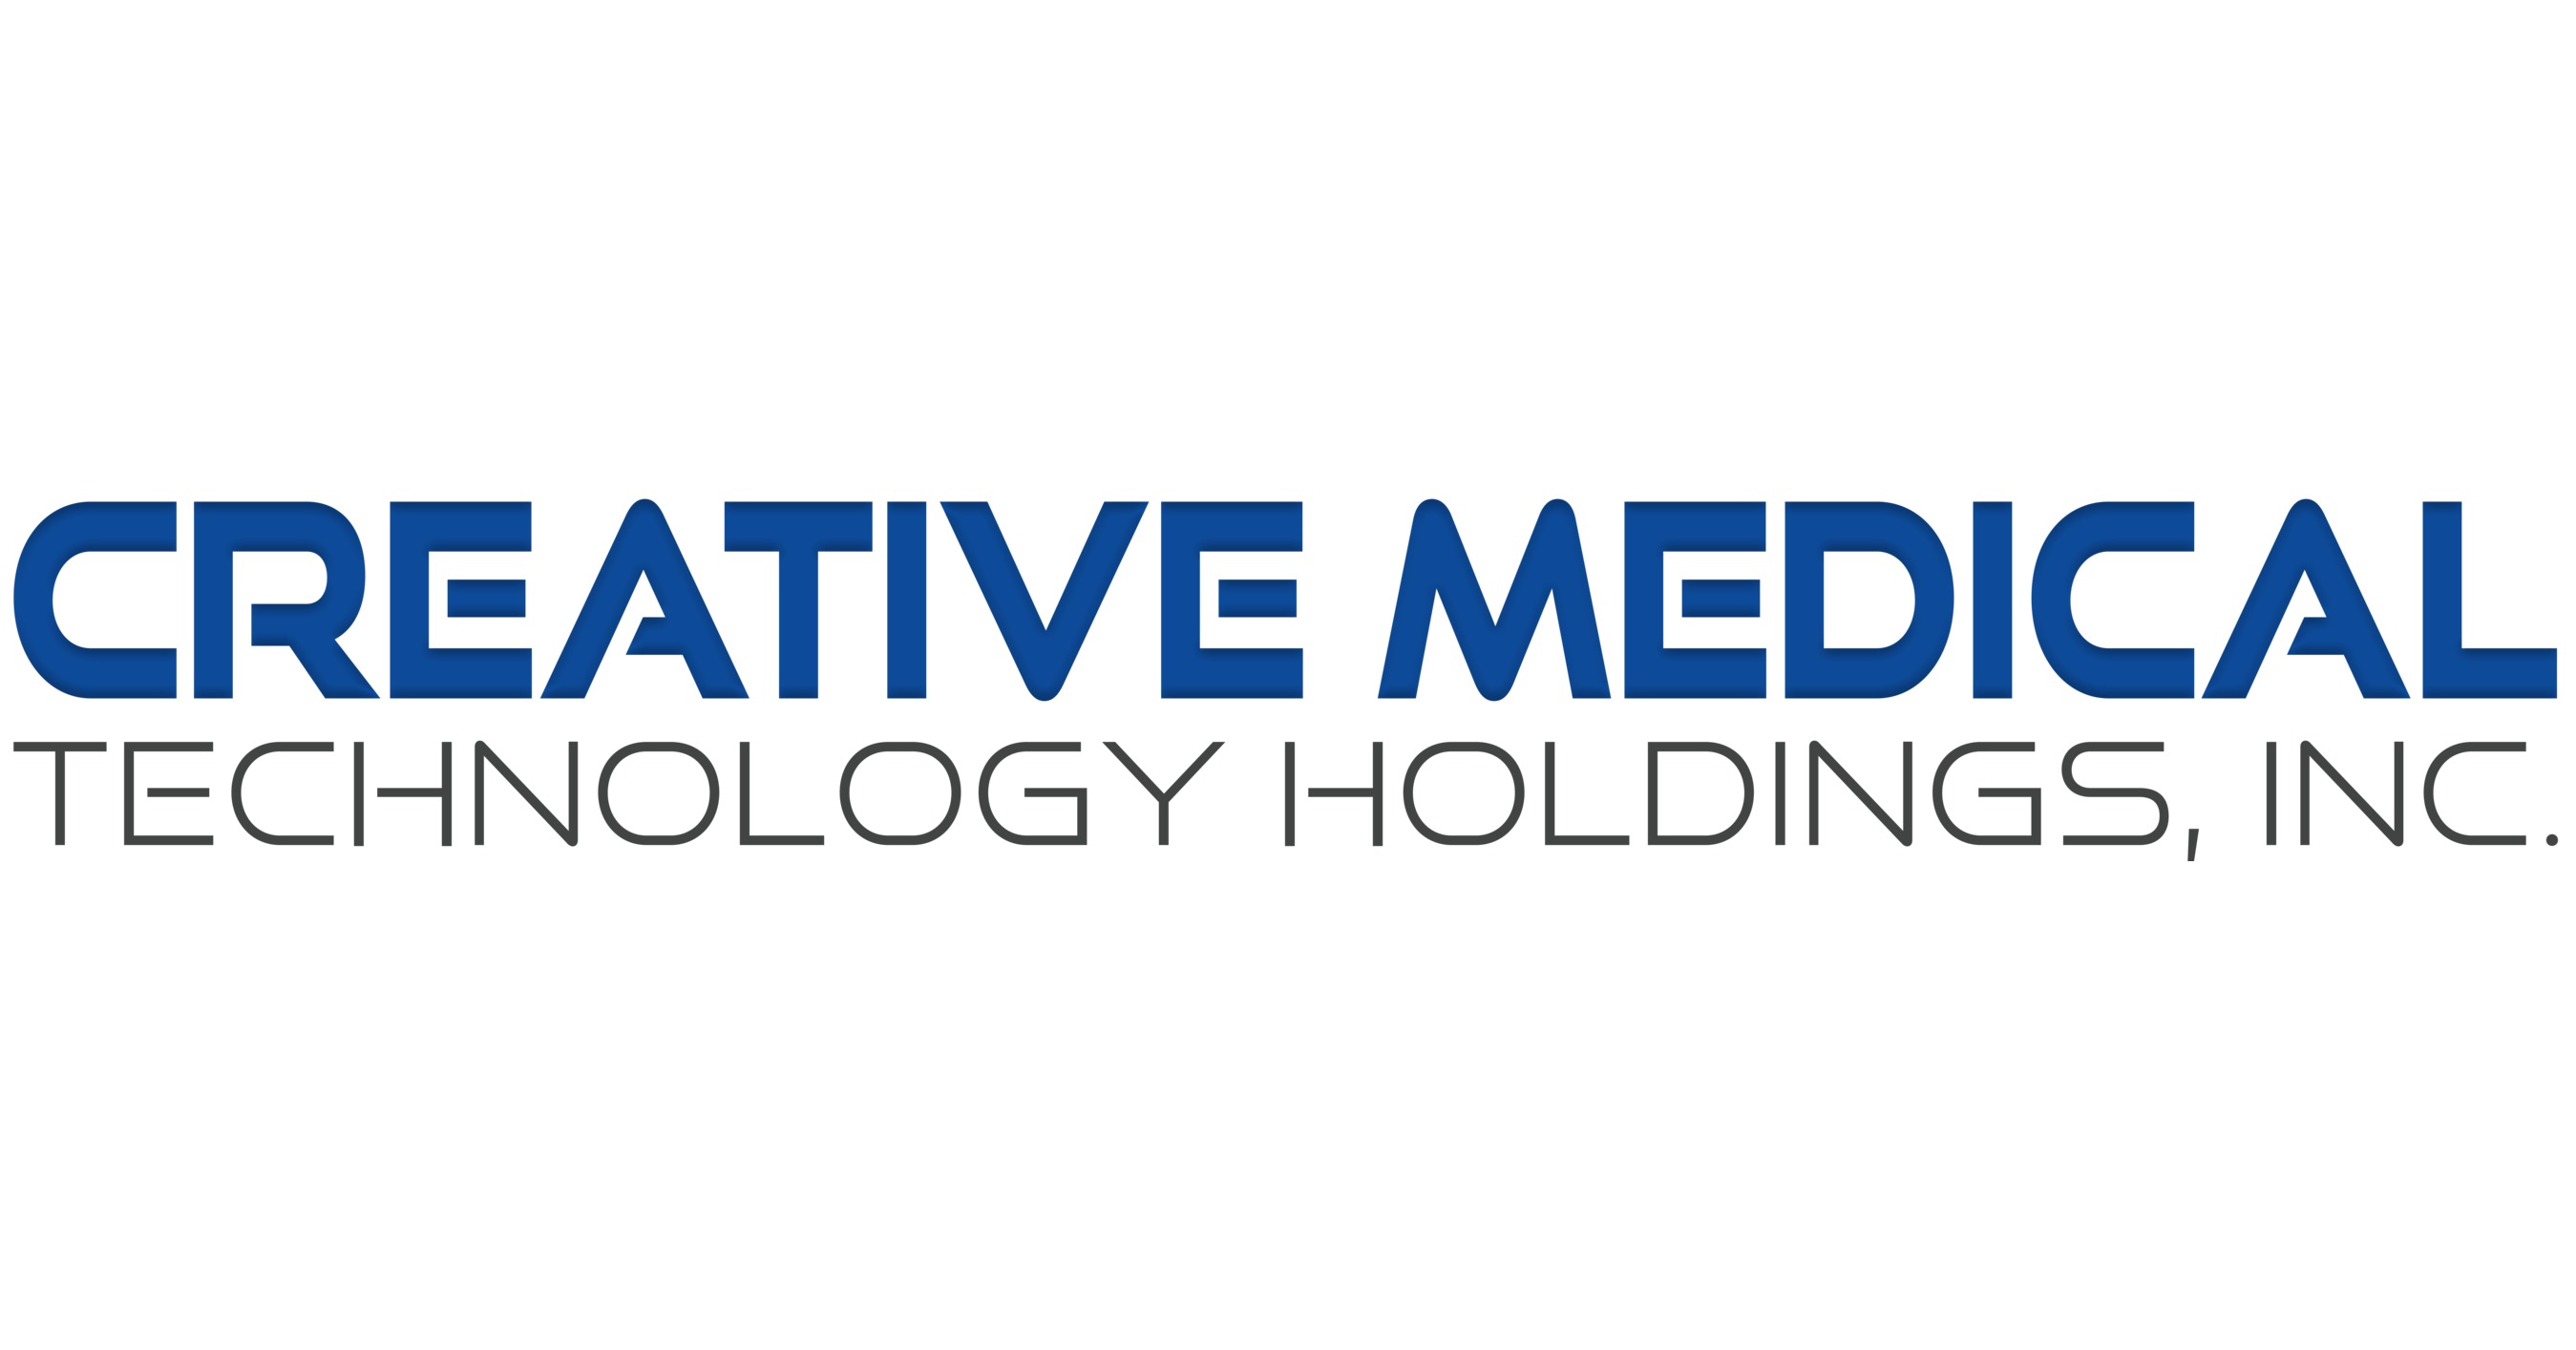 Application of Immunotherapy to  Billion Lower Back Pain Market Patented by Creative Medical Technology Holdings